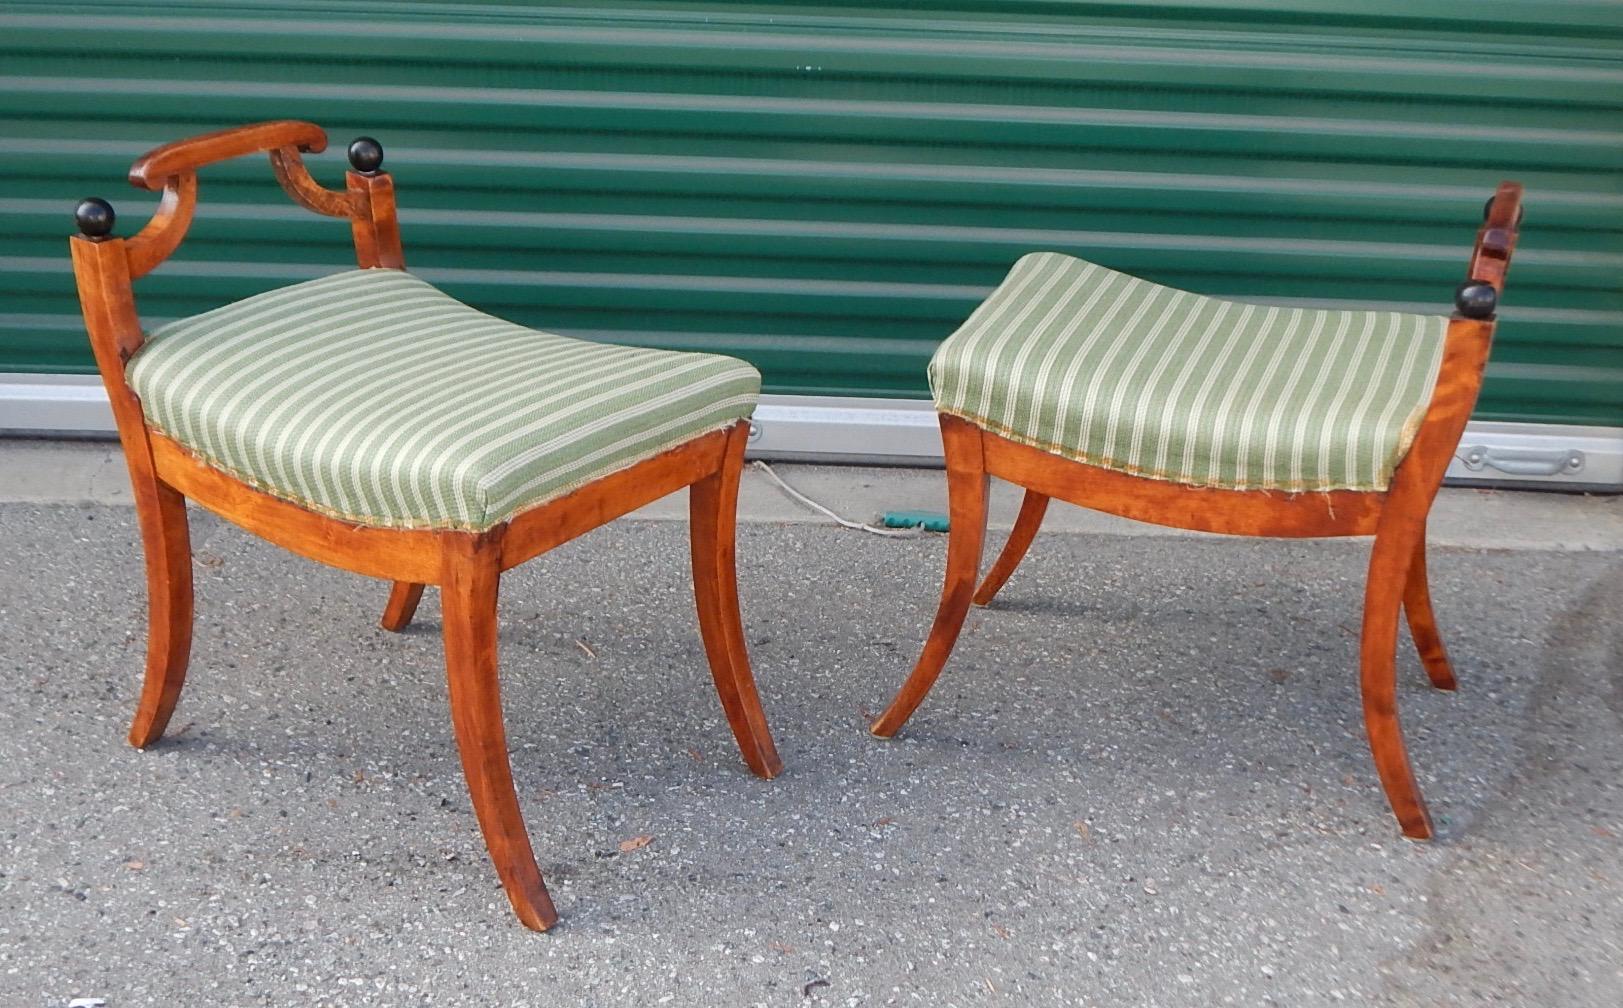 Pair of Swedish Biedermeier revival benches or stools. Rendered in golden birch wood with ebonized birch details. In original condition with no instability. In original fabric. Ready for a lifetime of good use, Sweden, circa 1920.